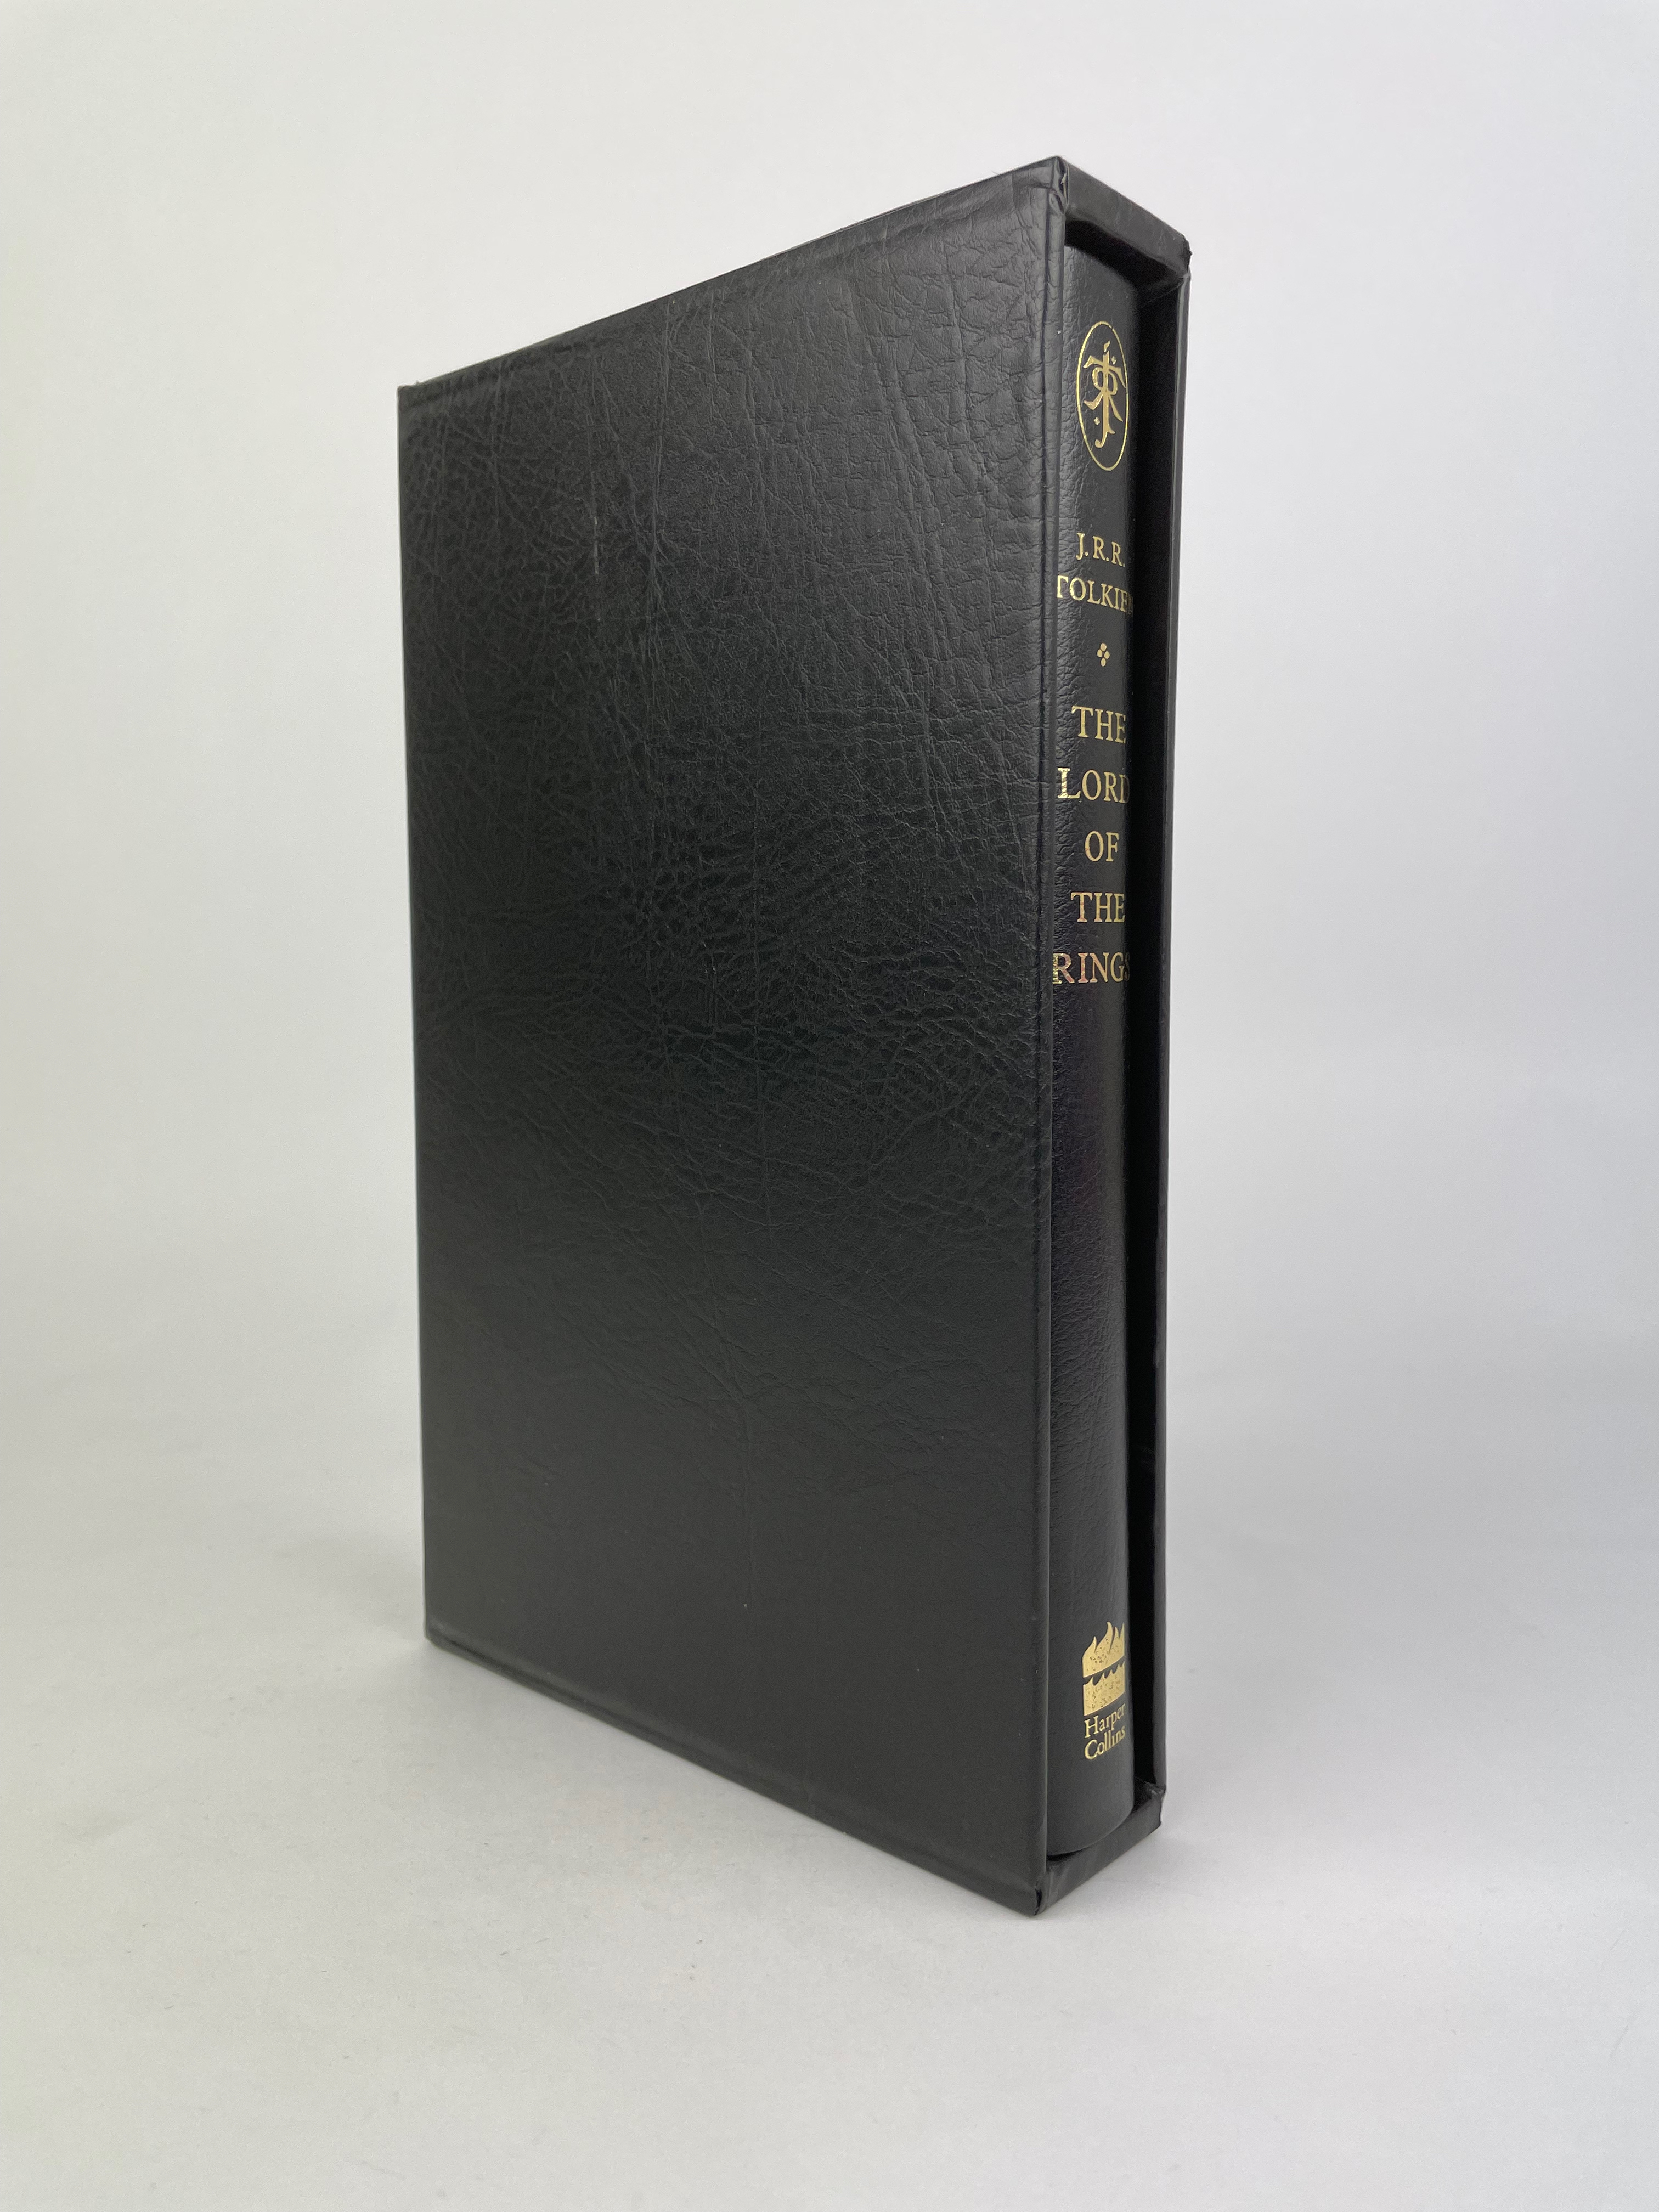 Lord of the Rings, Harper Collins Deluxe Limited Edition of 2002 - Black Leather 3